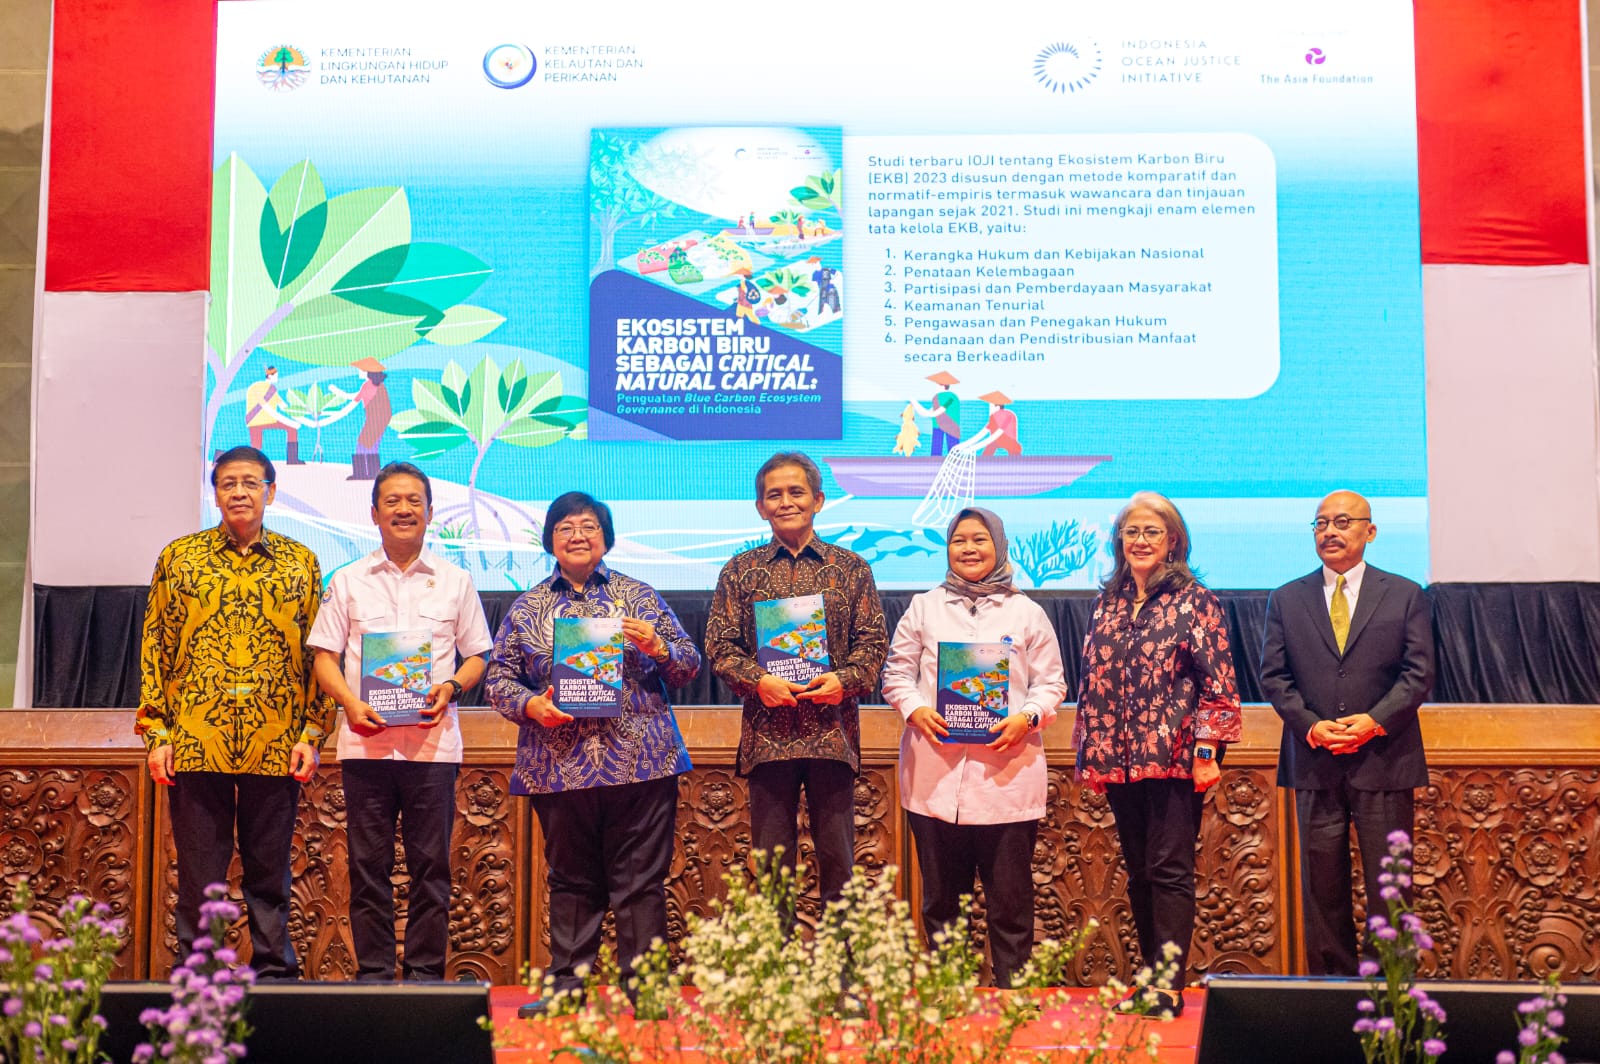 Environment Minister Siti Nurbaya and Maritime & Fisheries Affairs Minister Trenggono: Latest IOJI Study In Line with Policy, Government Mitigation and Adaptation Targets